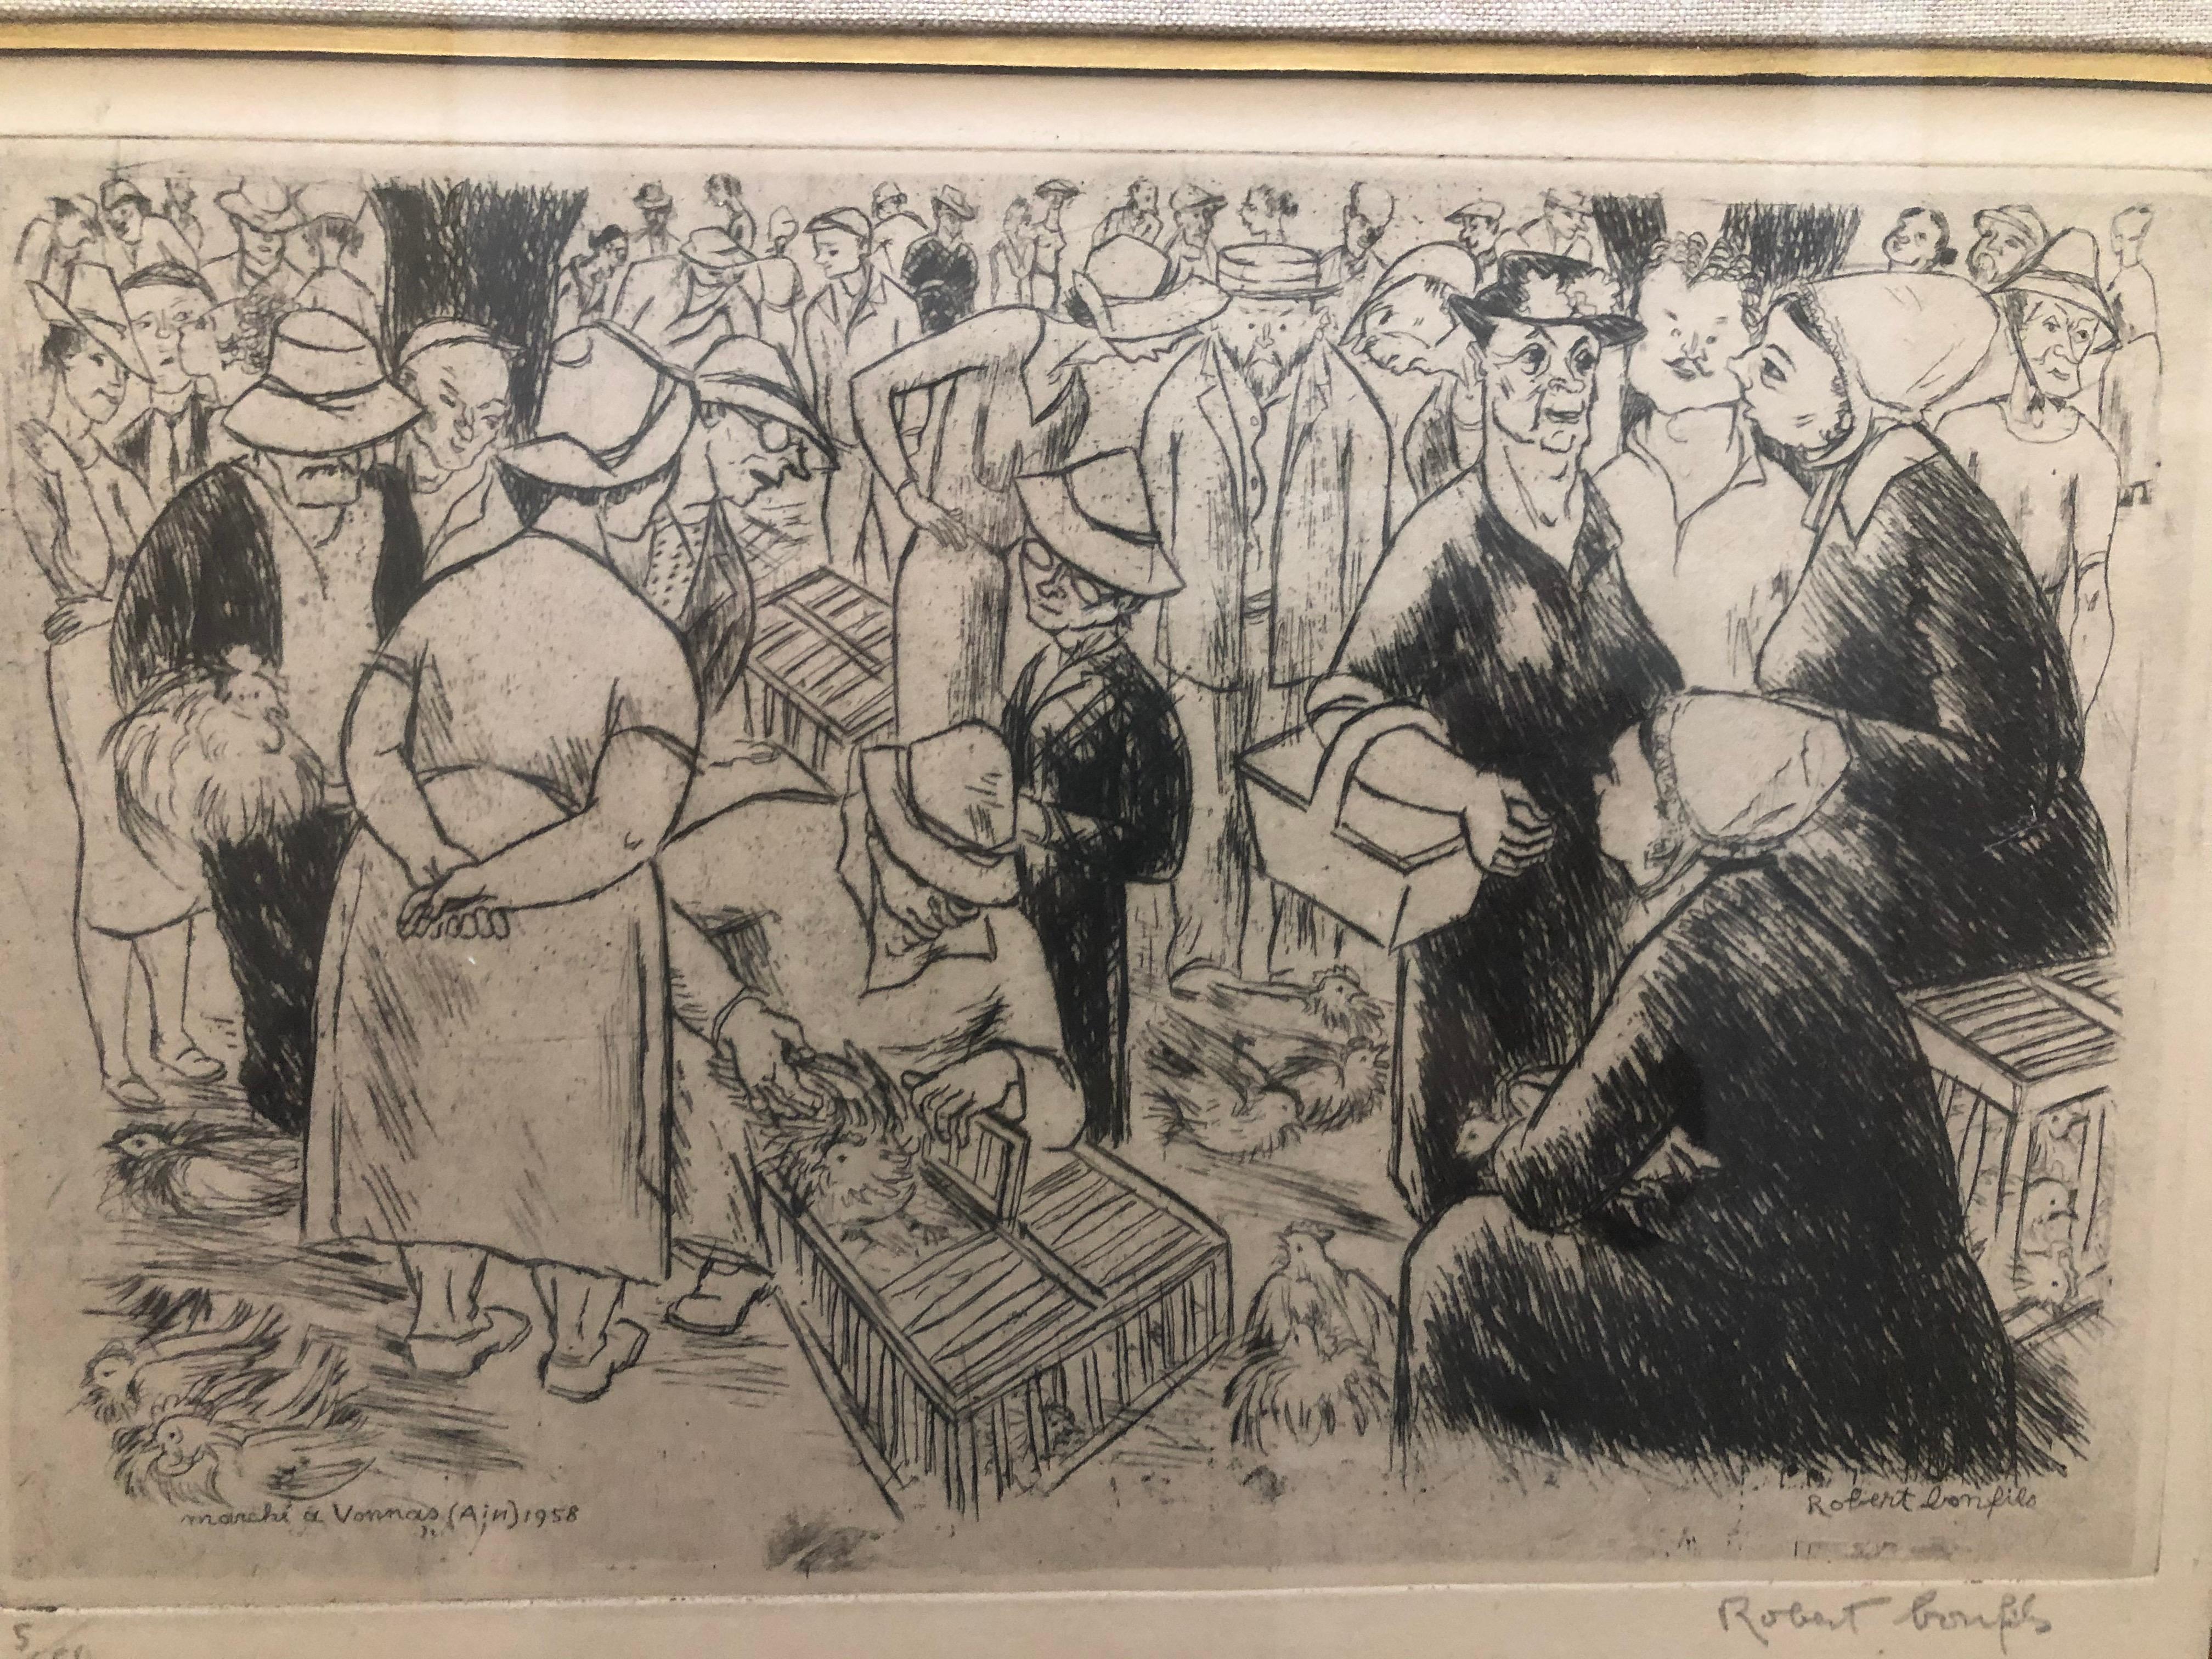 Robert Bonfils: 1886-1972. Well listed French artist with auction results for posters and prints over $8000. This fabulously busy etching measures 12 1/2 inches wide by 9 high. It is beautifully framed with silk matting. Frame measures 19 3/4 inches